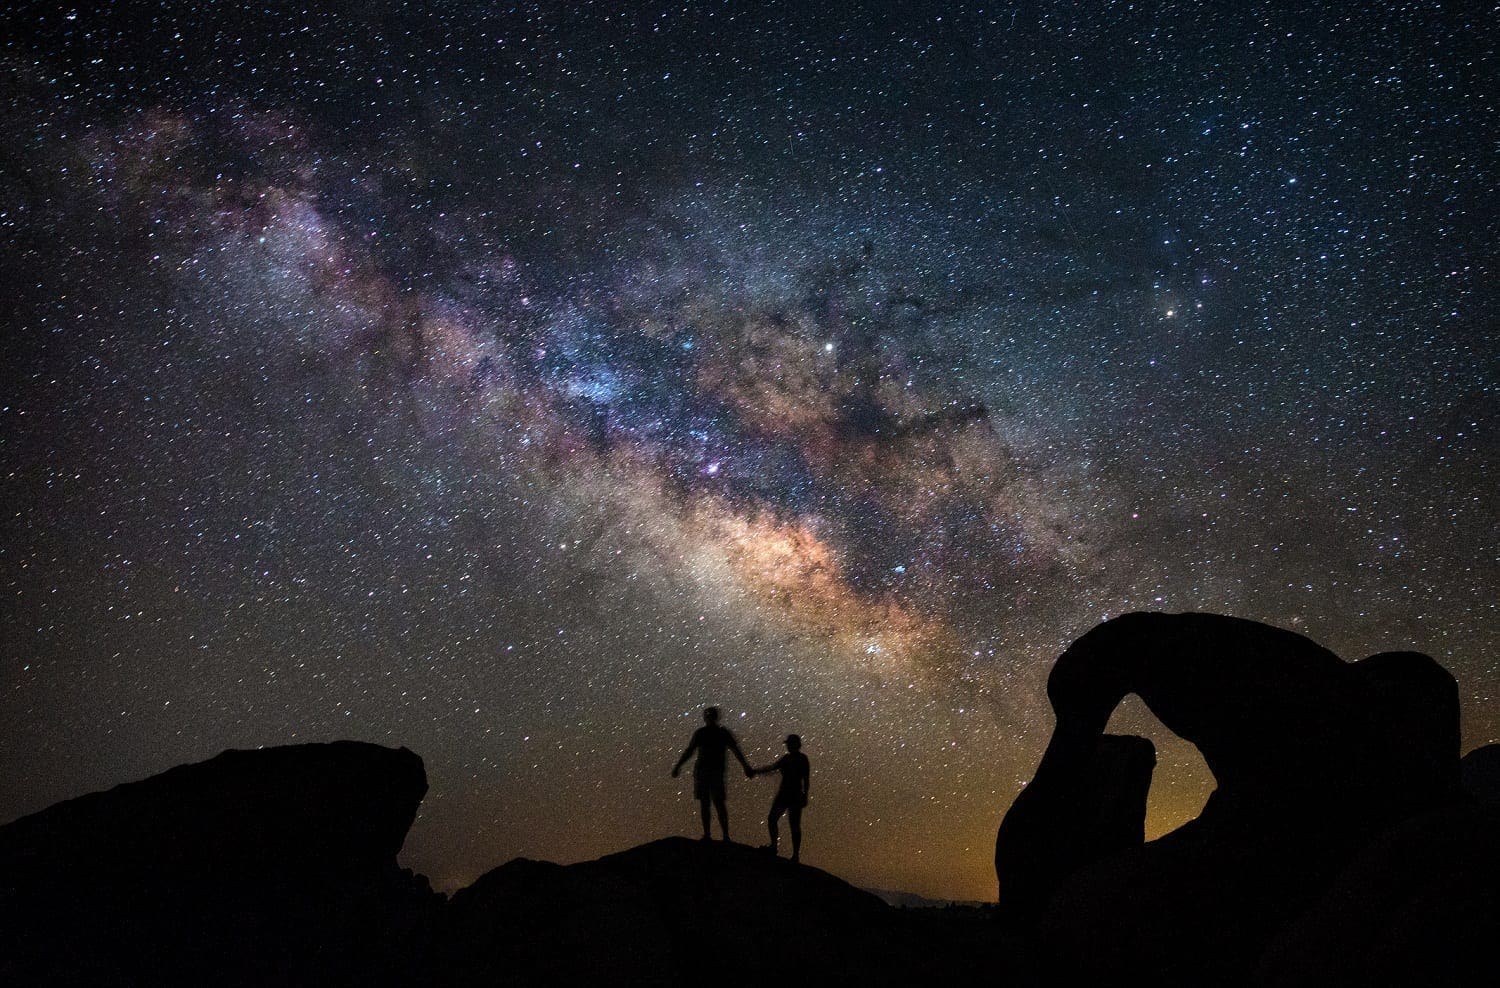 Silhouette of two people under the Milky Way at Mobius Arch: ID 98902216 © Valentin Armianu | Dreamstime.com